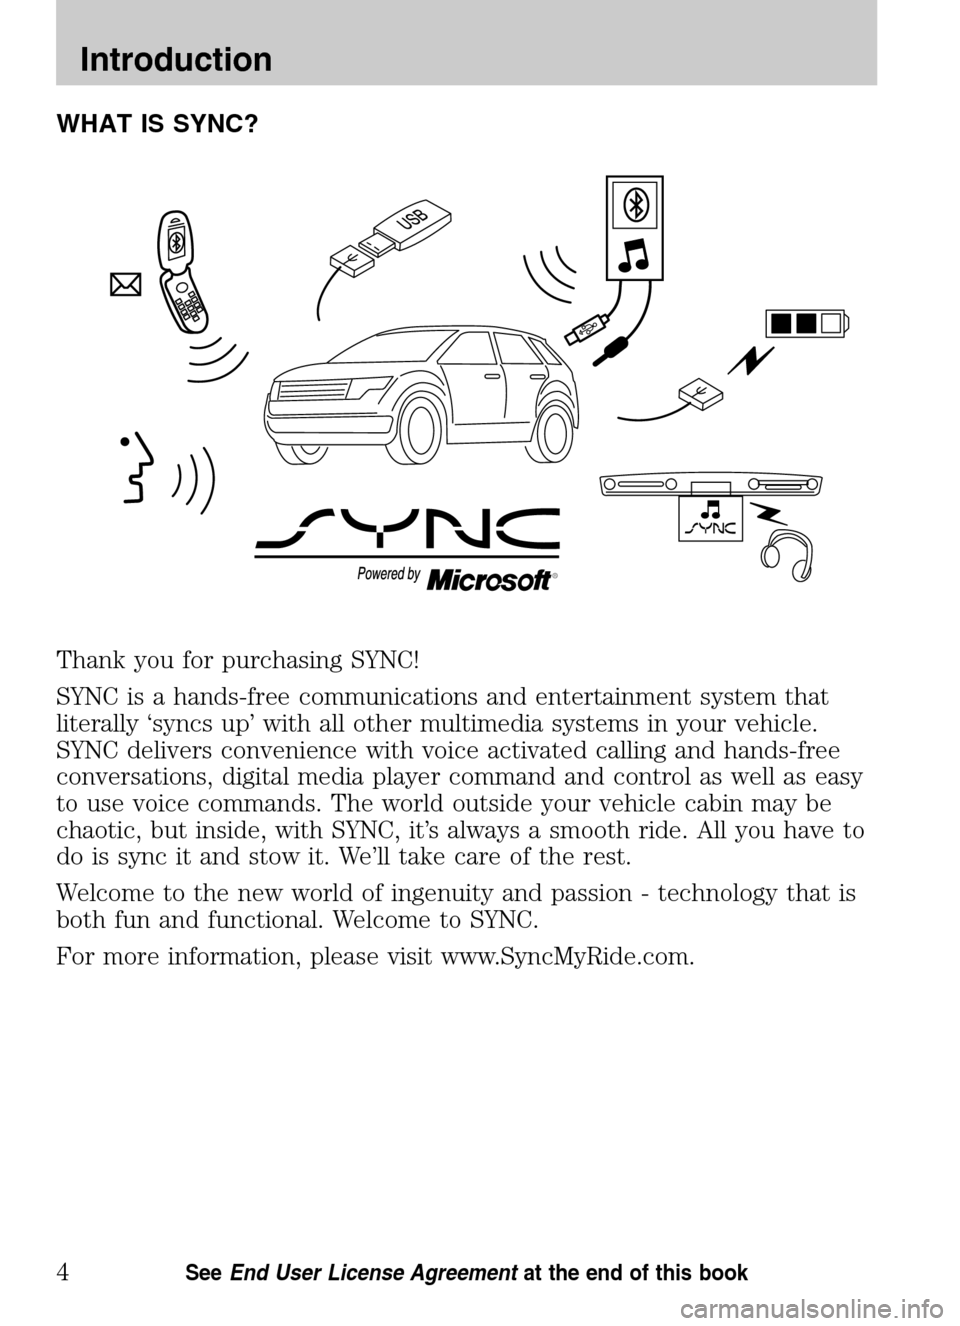 Mercury Mariner 2009  SYNC Supplement  WHAT IS SYNC? 
Thank you for purchasing SYNC! 
SYNC is a hands-free communications and entertainment system that 
literally ‘syncs up’ with all other multimedia systems in your vehicle.
SYNC deliv